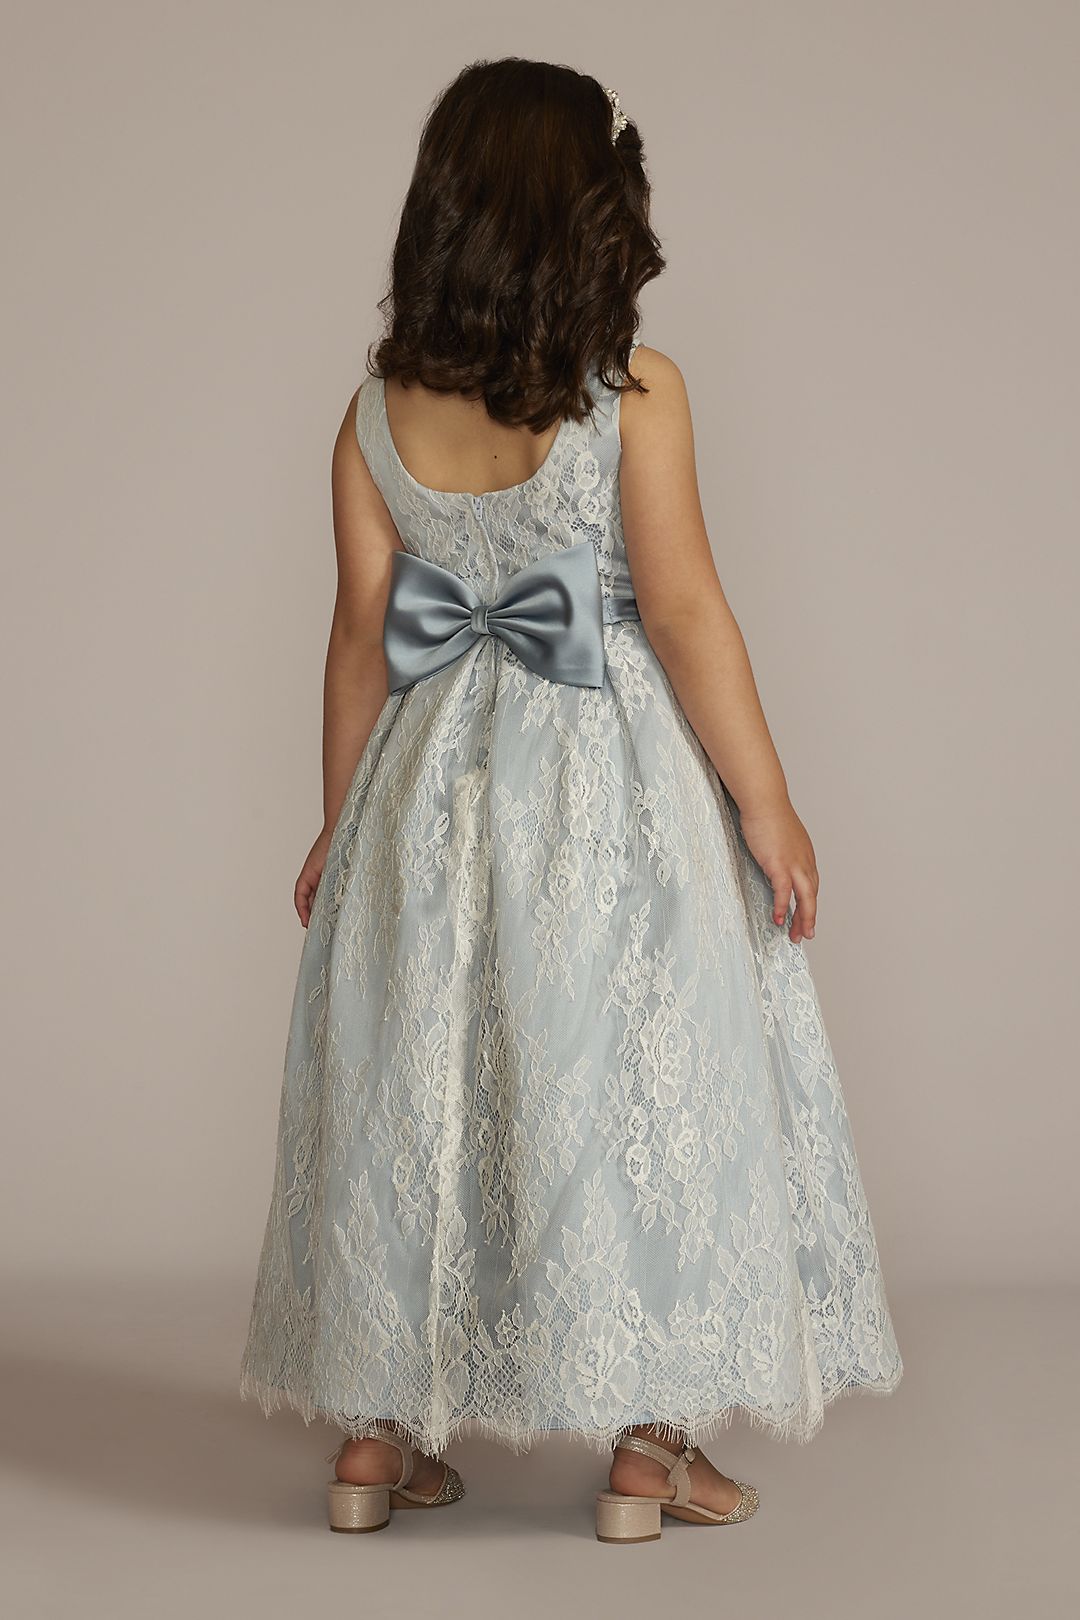 Lace and Satin Ball Gown Flower Girl Dress Image 2